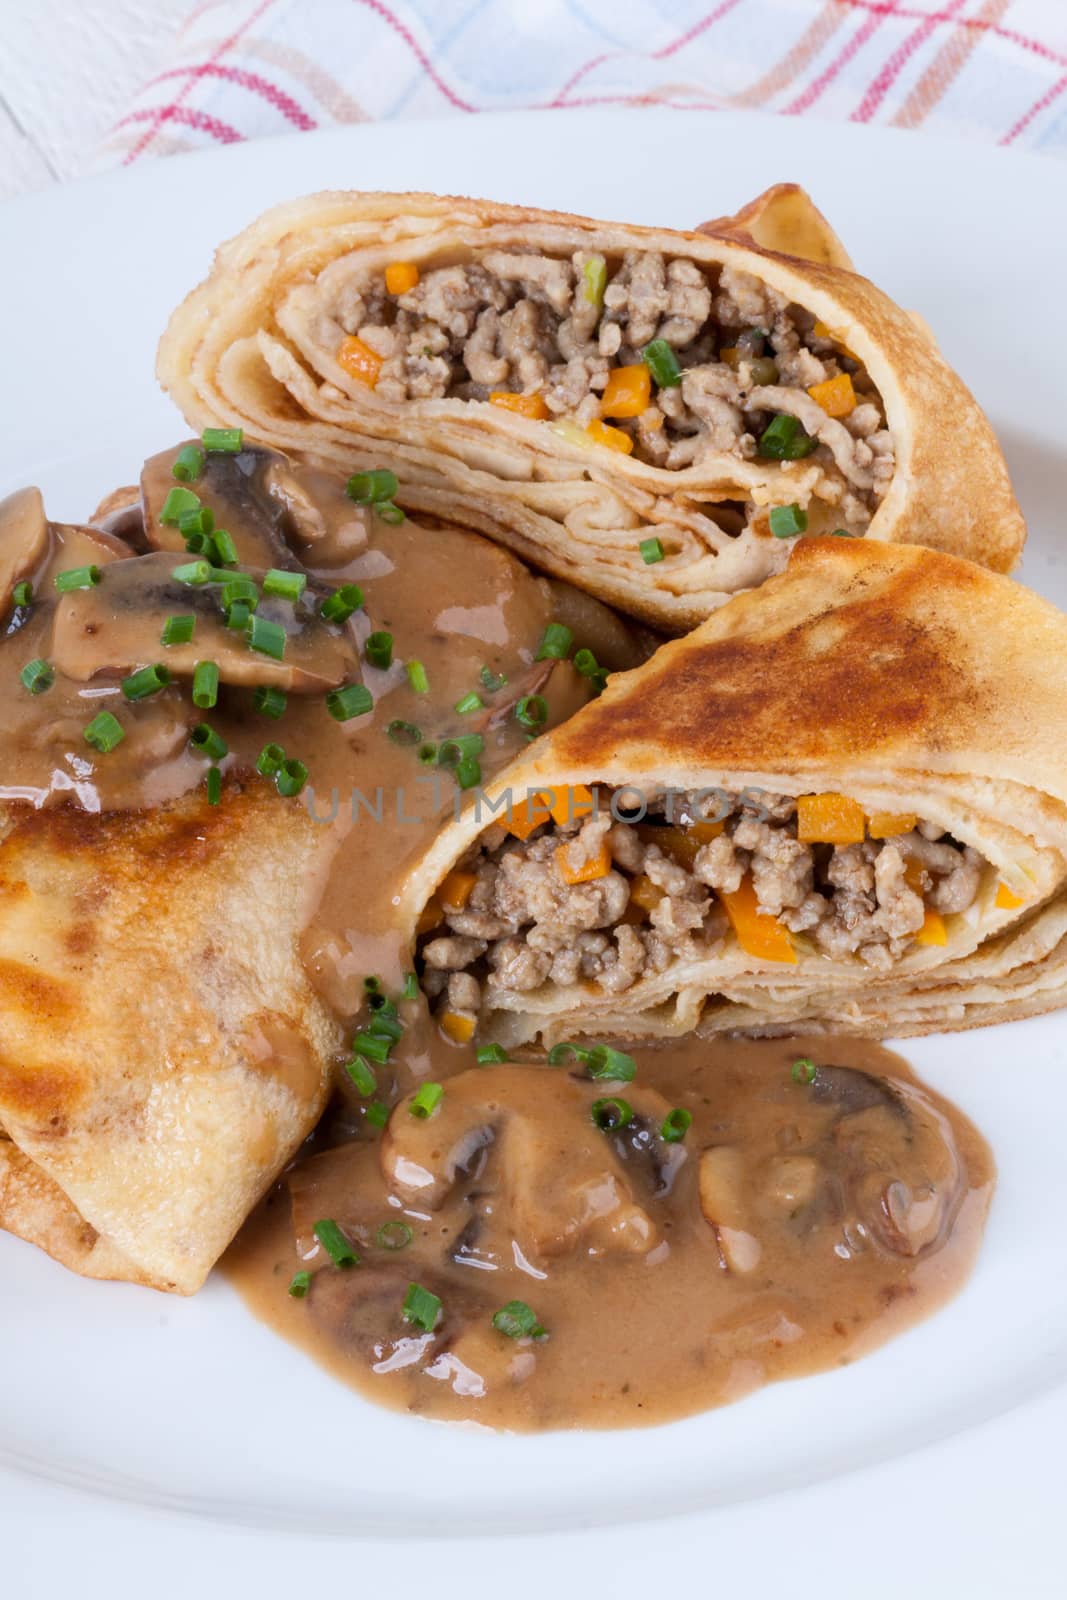 Savory mince pancakes or tortillas by juniart